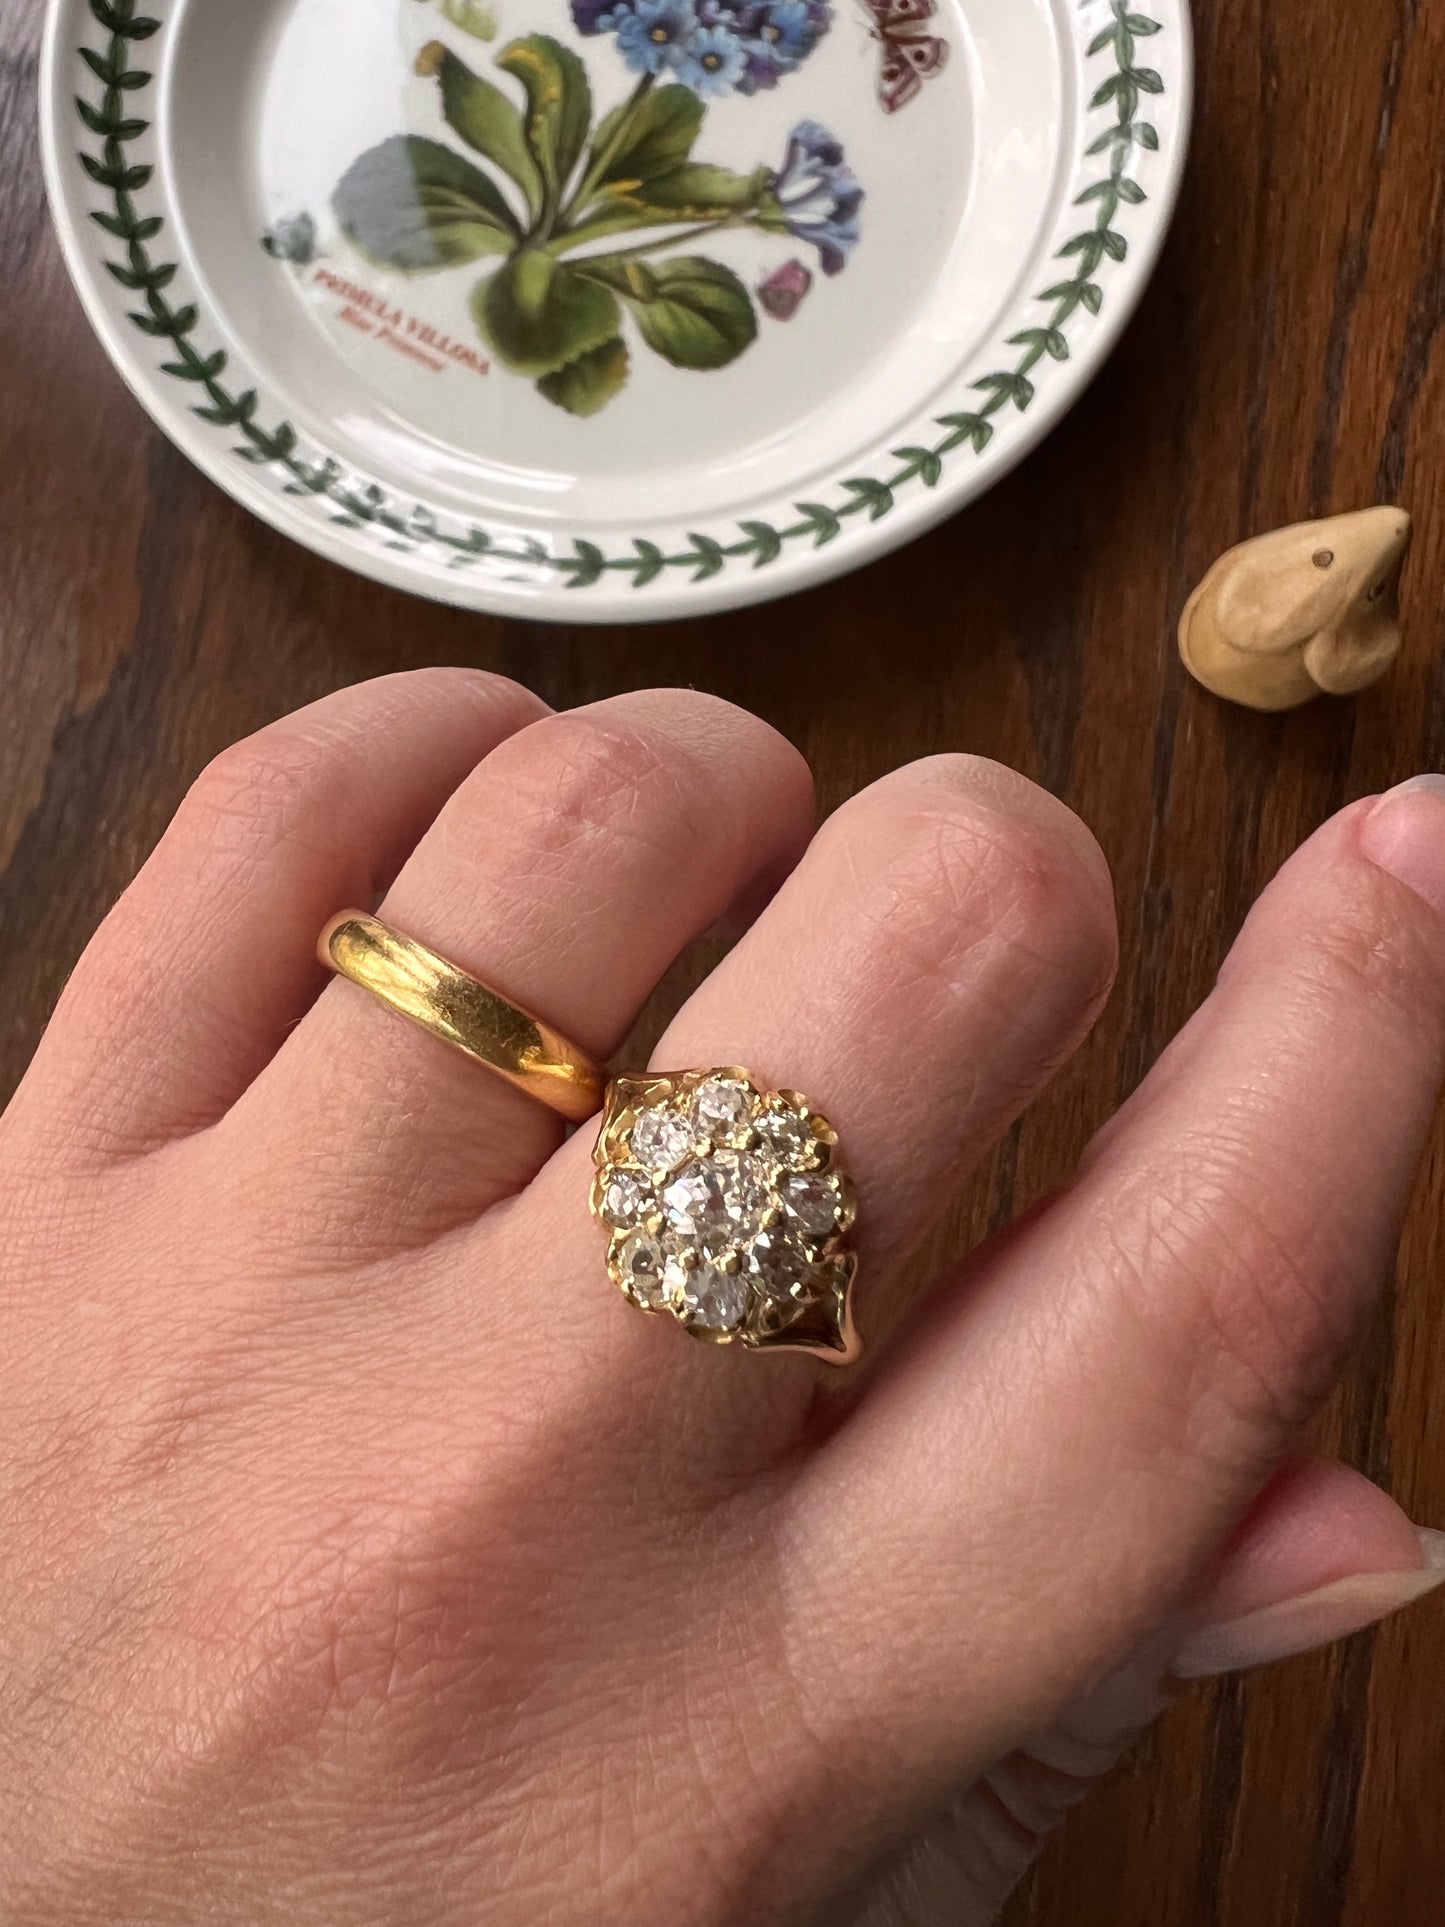 ANTIQUE 1.25 Carat 9 Old Mine Cut DIAMOND Cluster Ring 4.3g 18k Gold Romantic Gift Stacker Band OMC Victorian